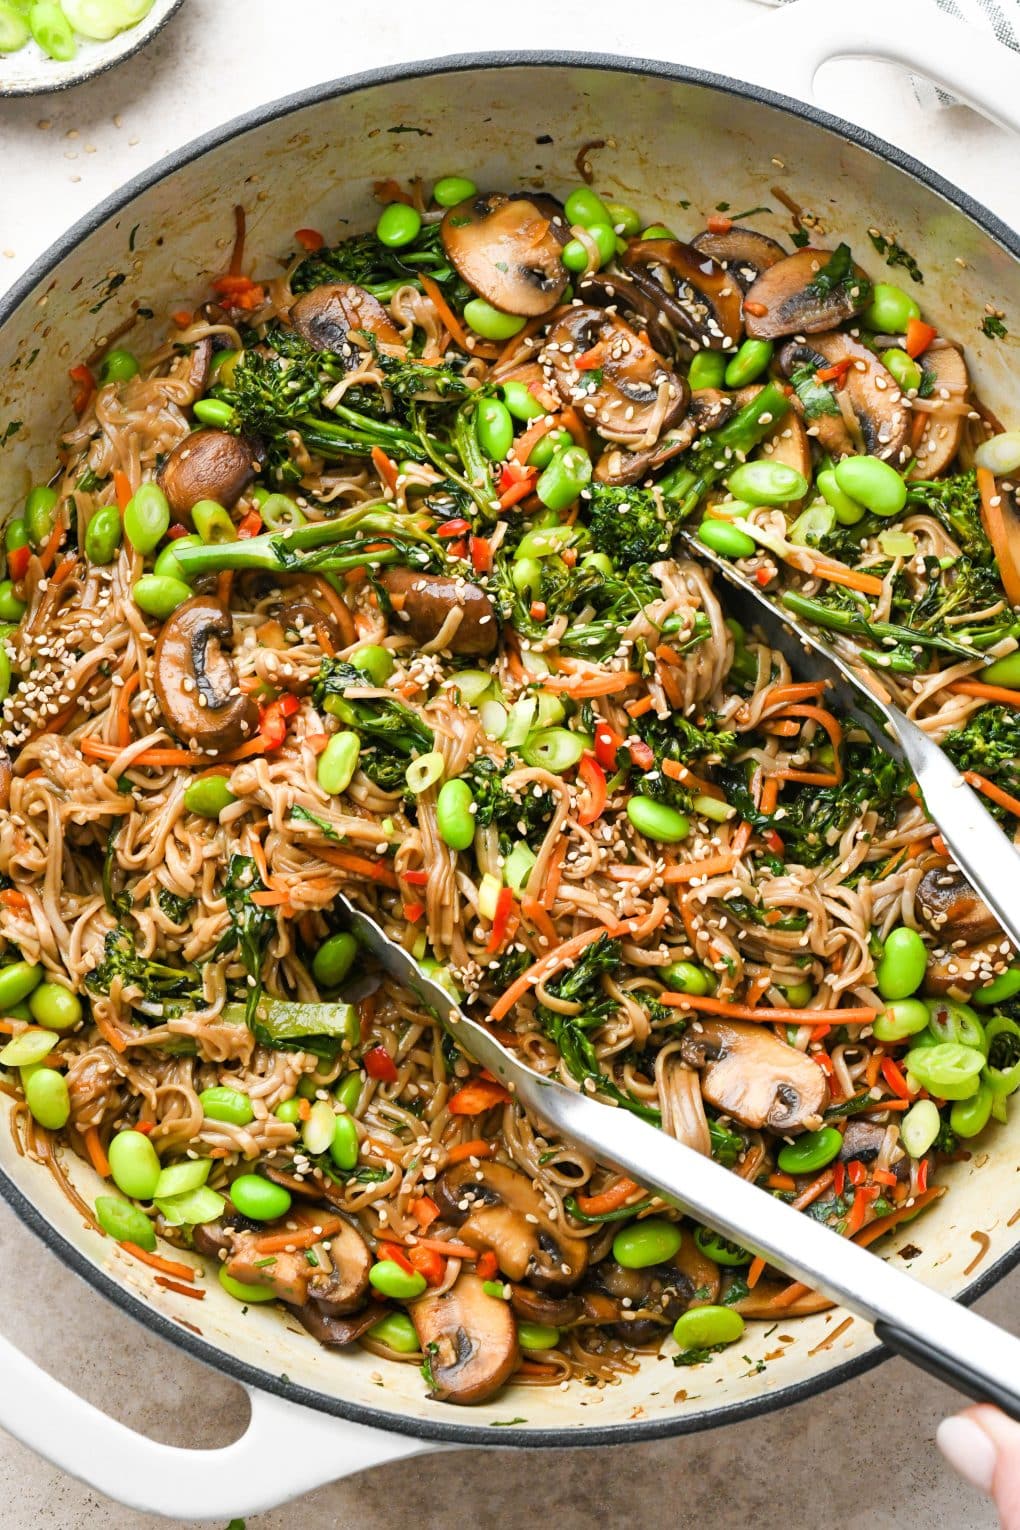 Overhead image of a large skillet filled with a colorful soba noodle stir fry.